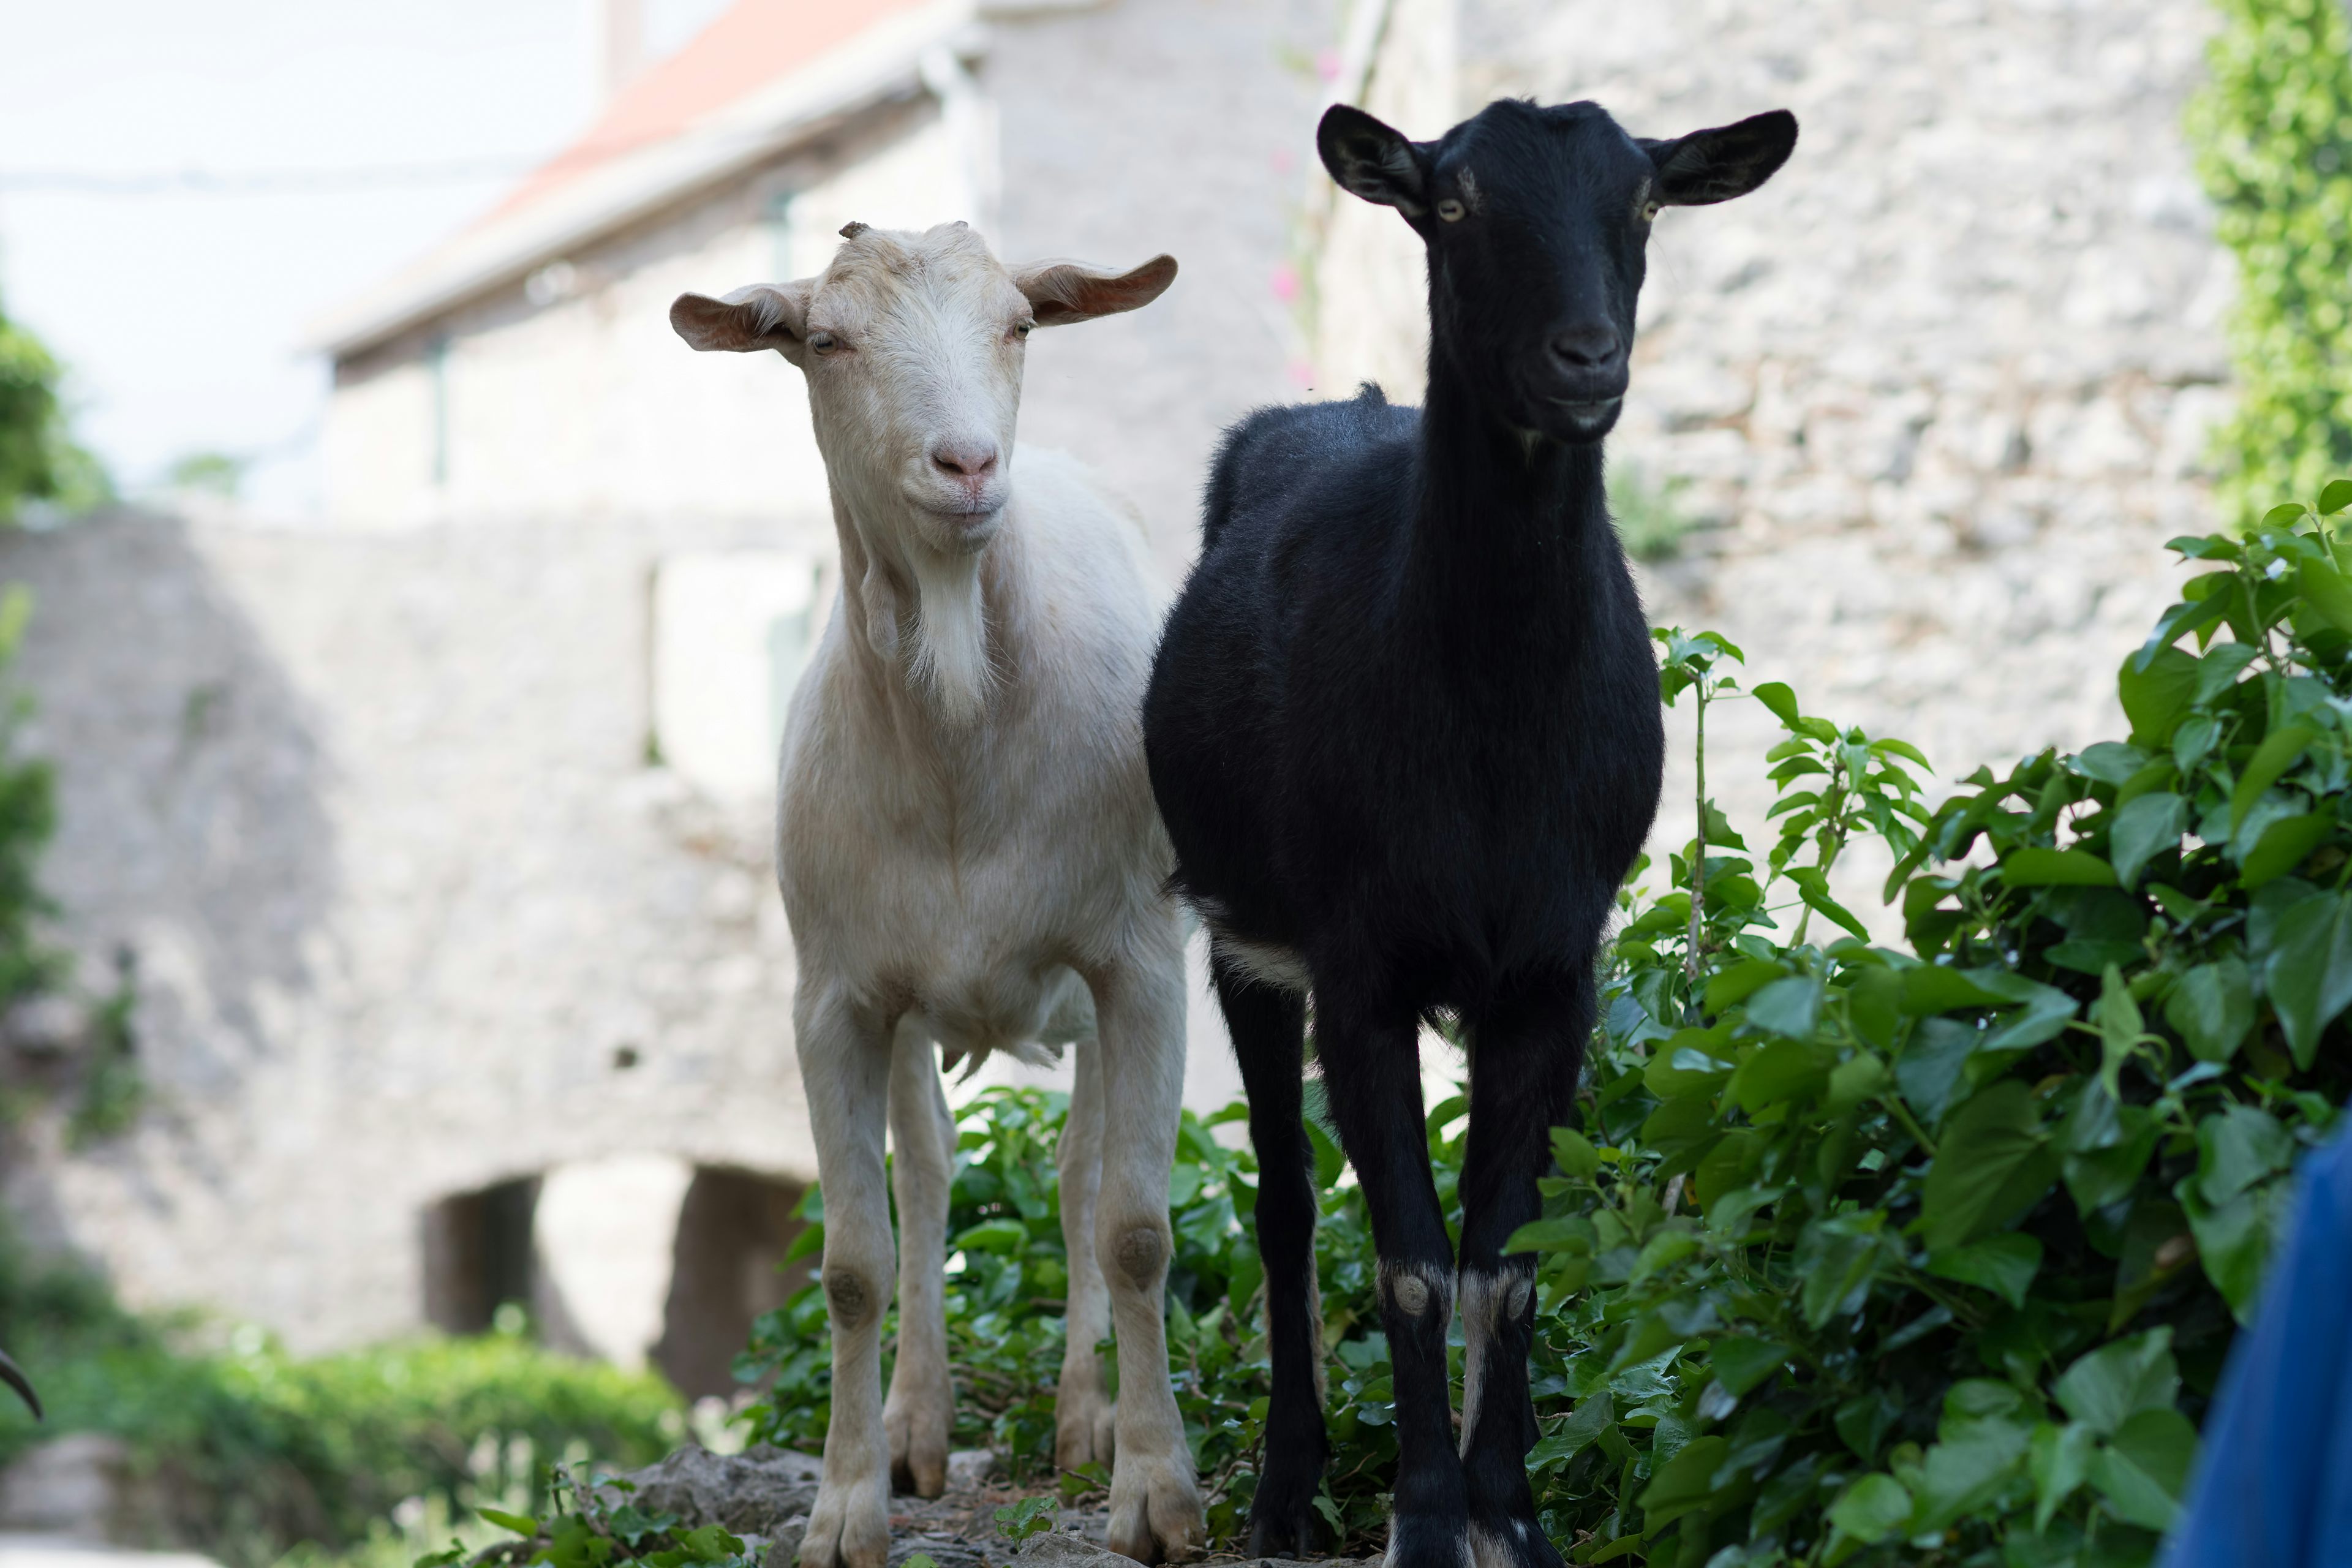 A black goat and a white goat stand next to each other in a rural setting